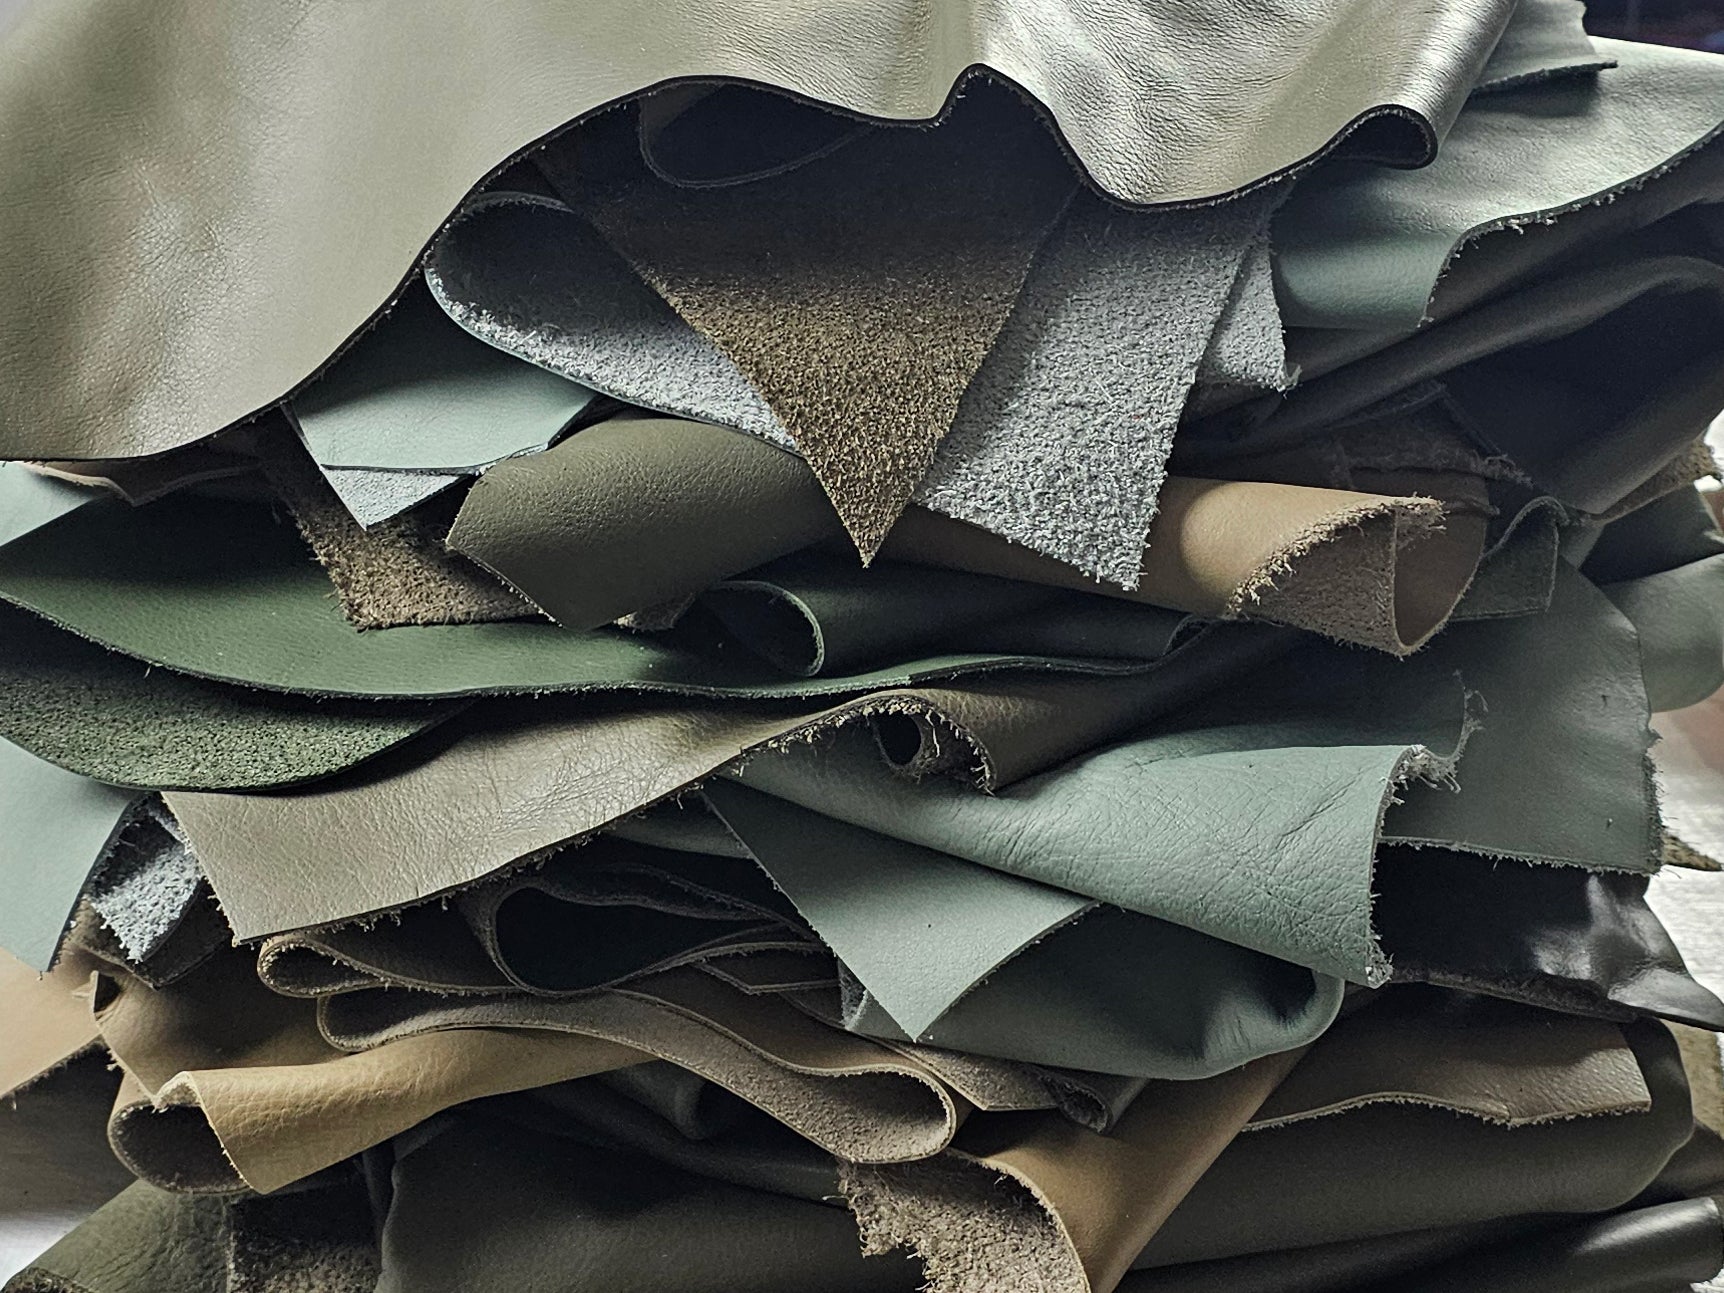 Assorted Green leather scraps for crafts 1 - 2 sq ft